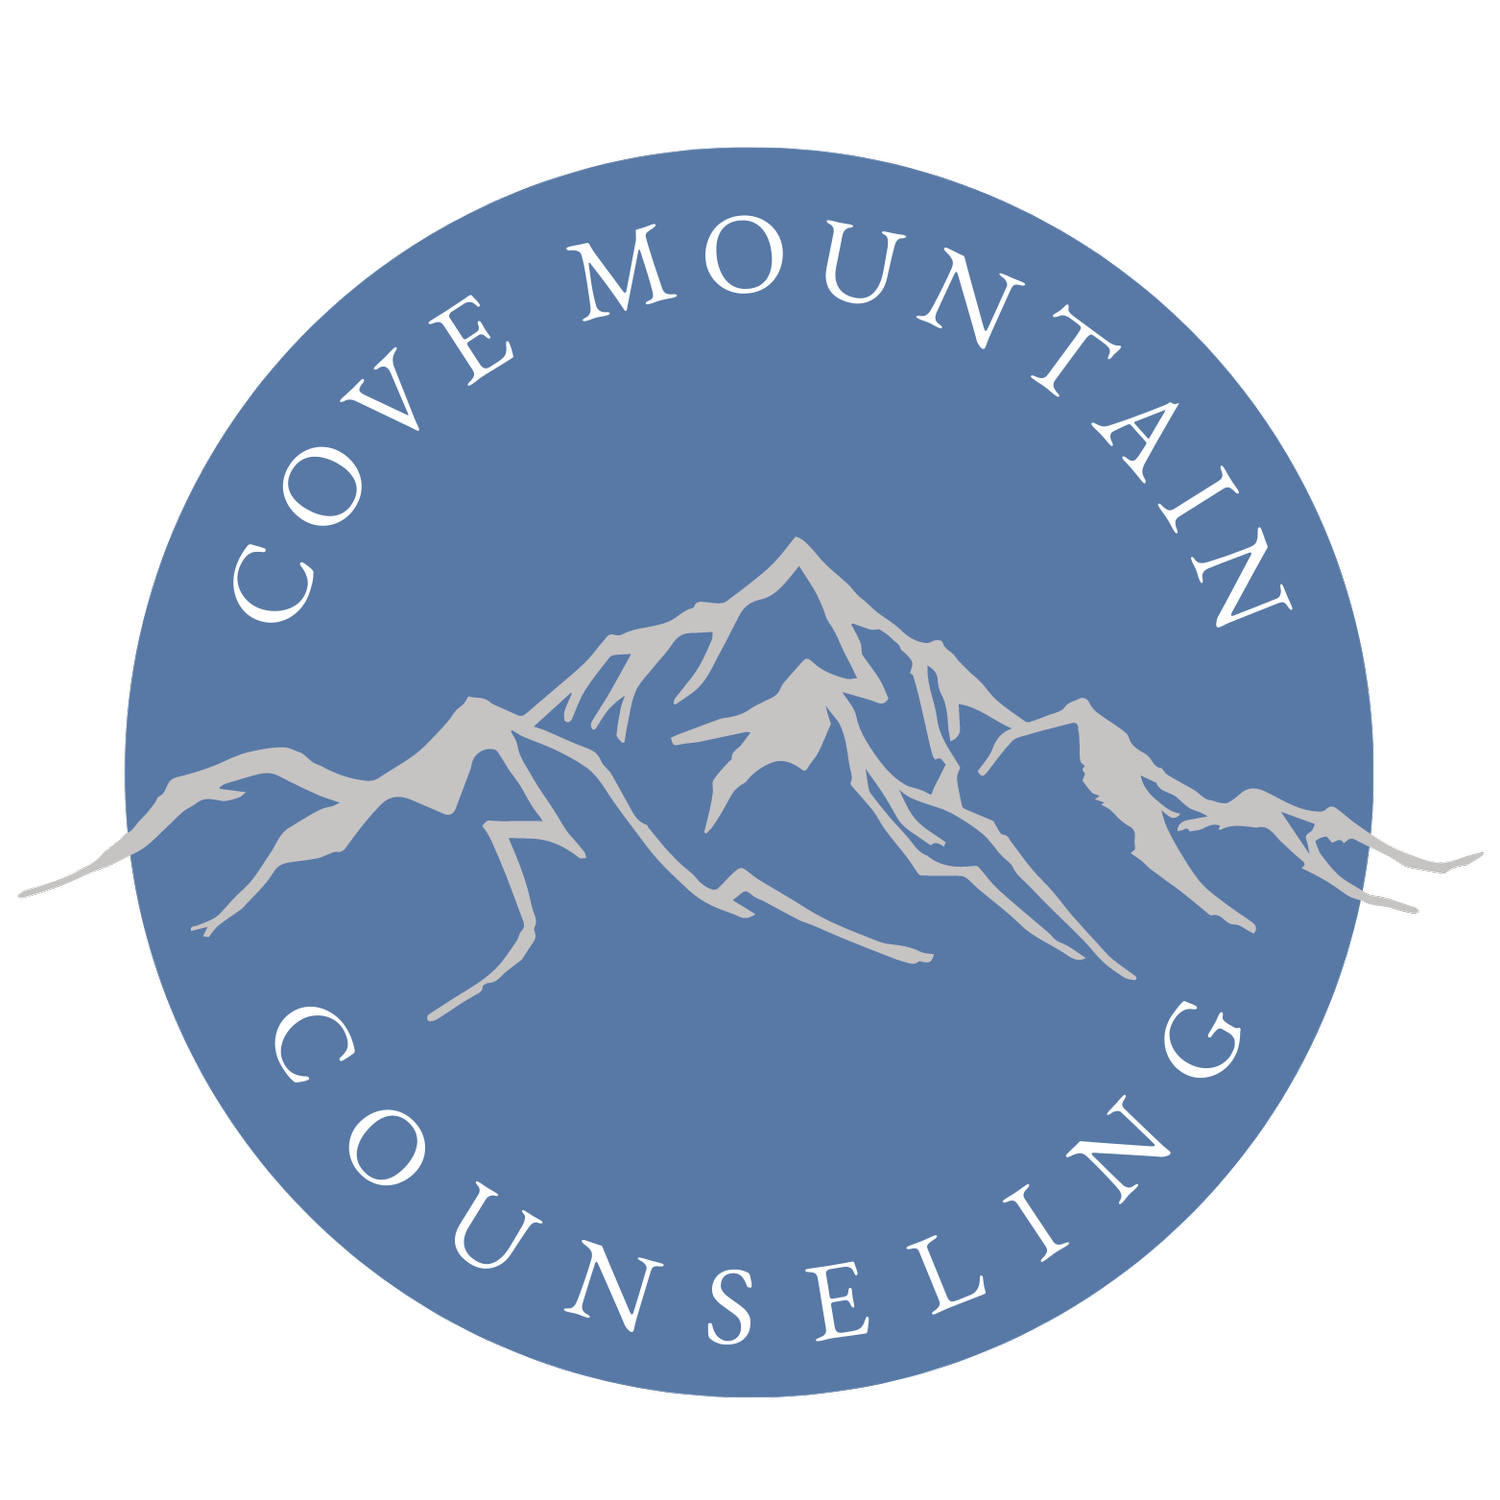 Cove Mountain Counseling